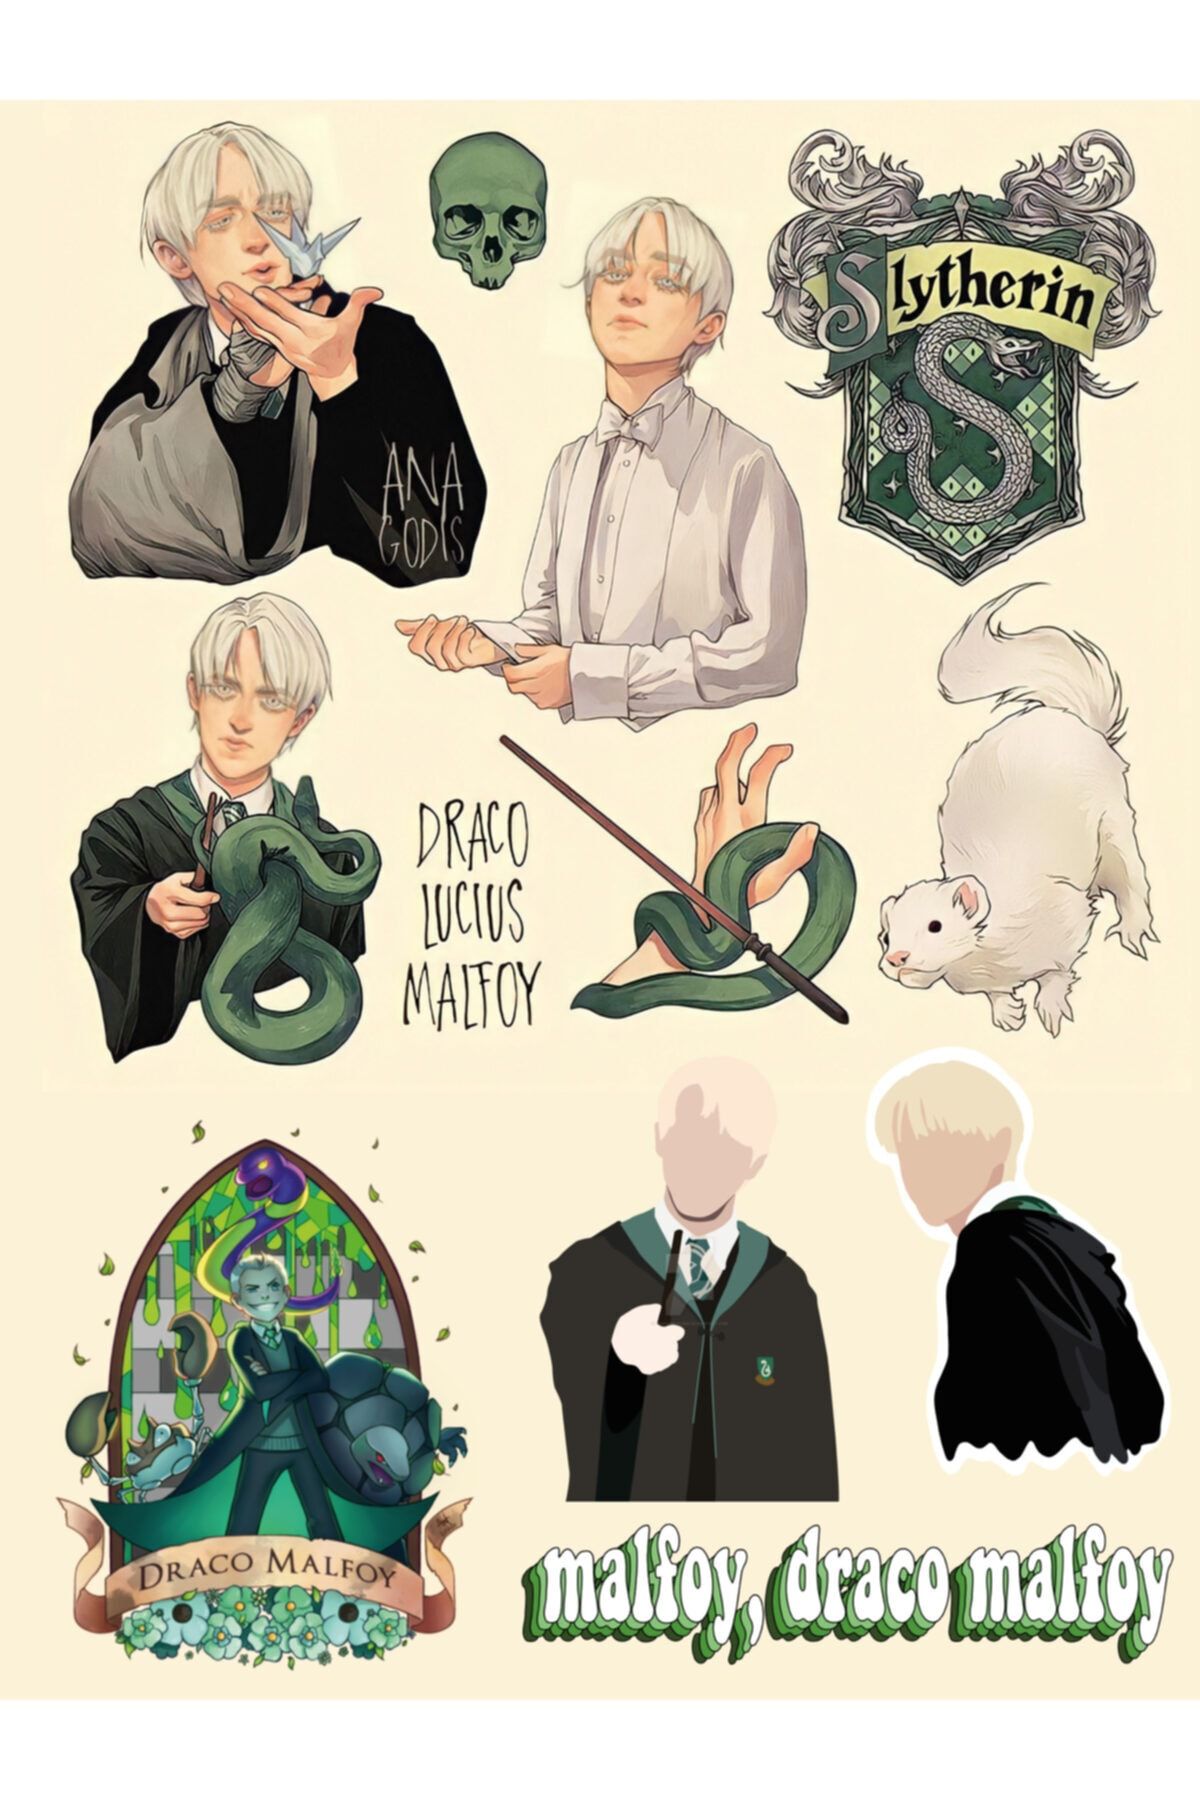 How long is draco malfoy's dick